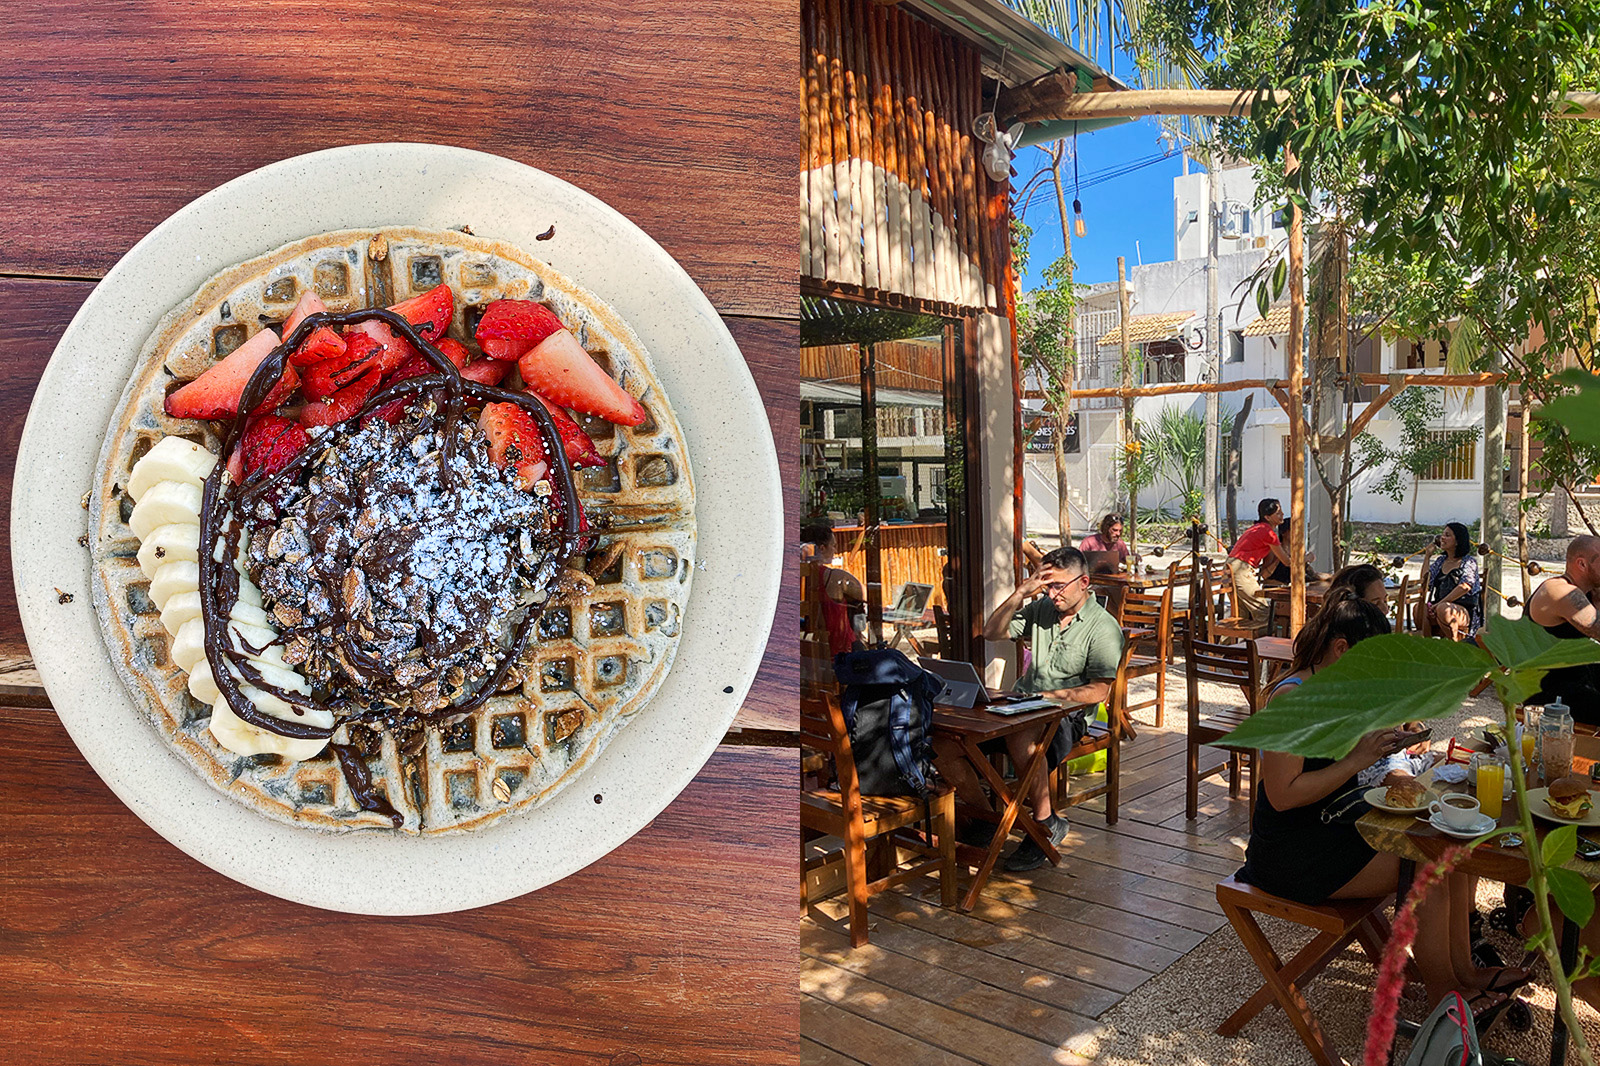 Chew & Lush-Best cafes for strong WiFi & yummy ‘healthy’ eats in Playa del Carmen featuring Le P’tit Shoux